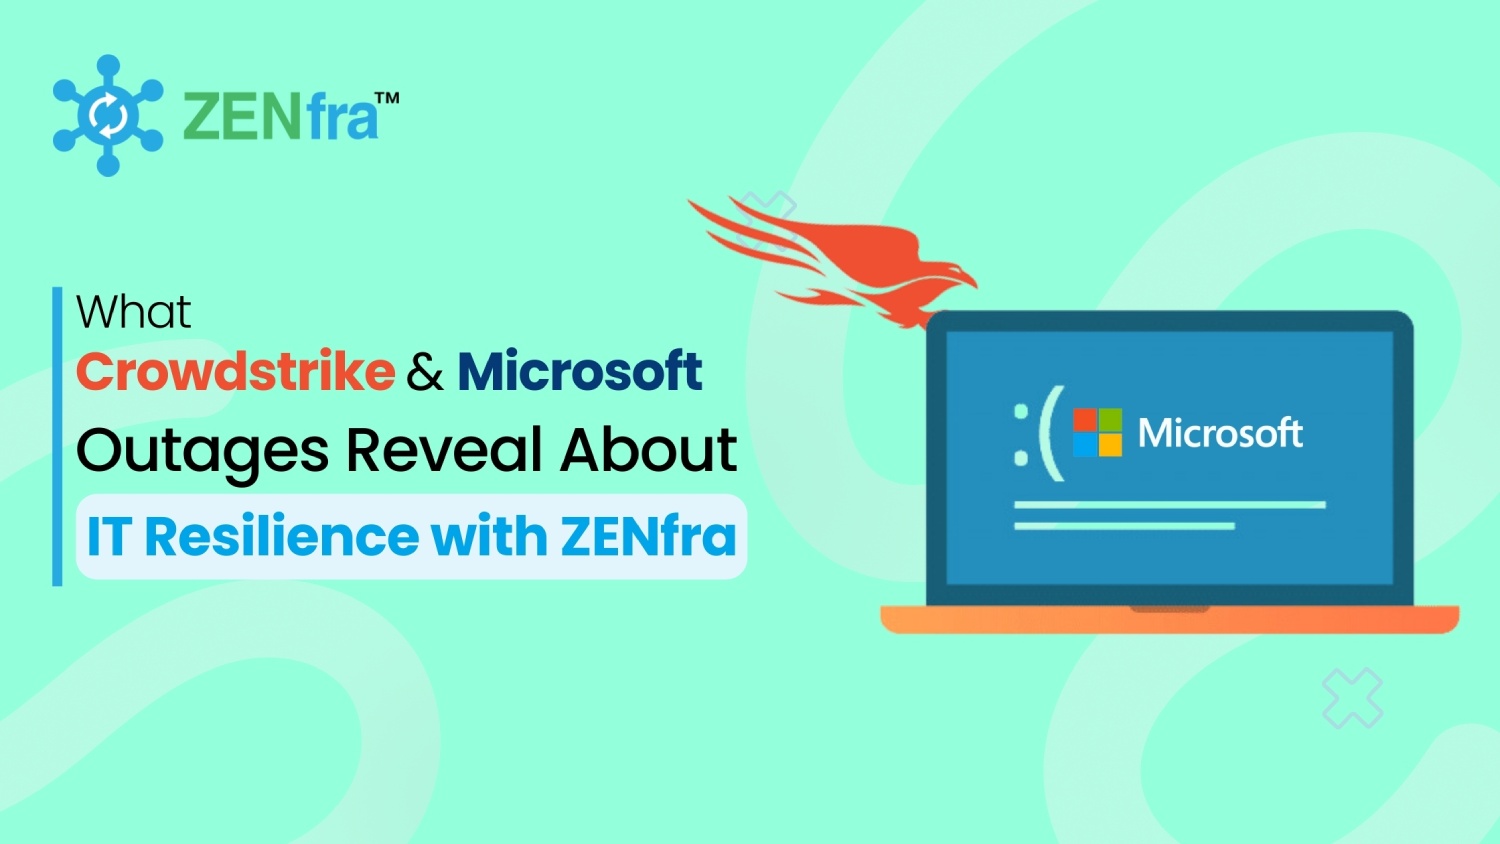 What Crowdstrike and Microsoft Outages Reveal About IT Resilience with ZENfra